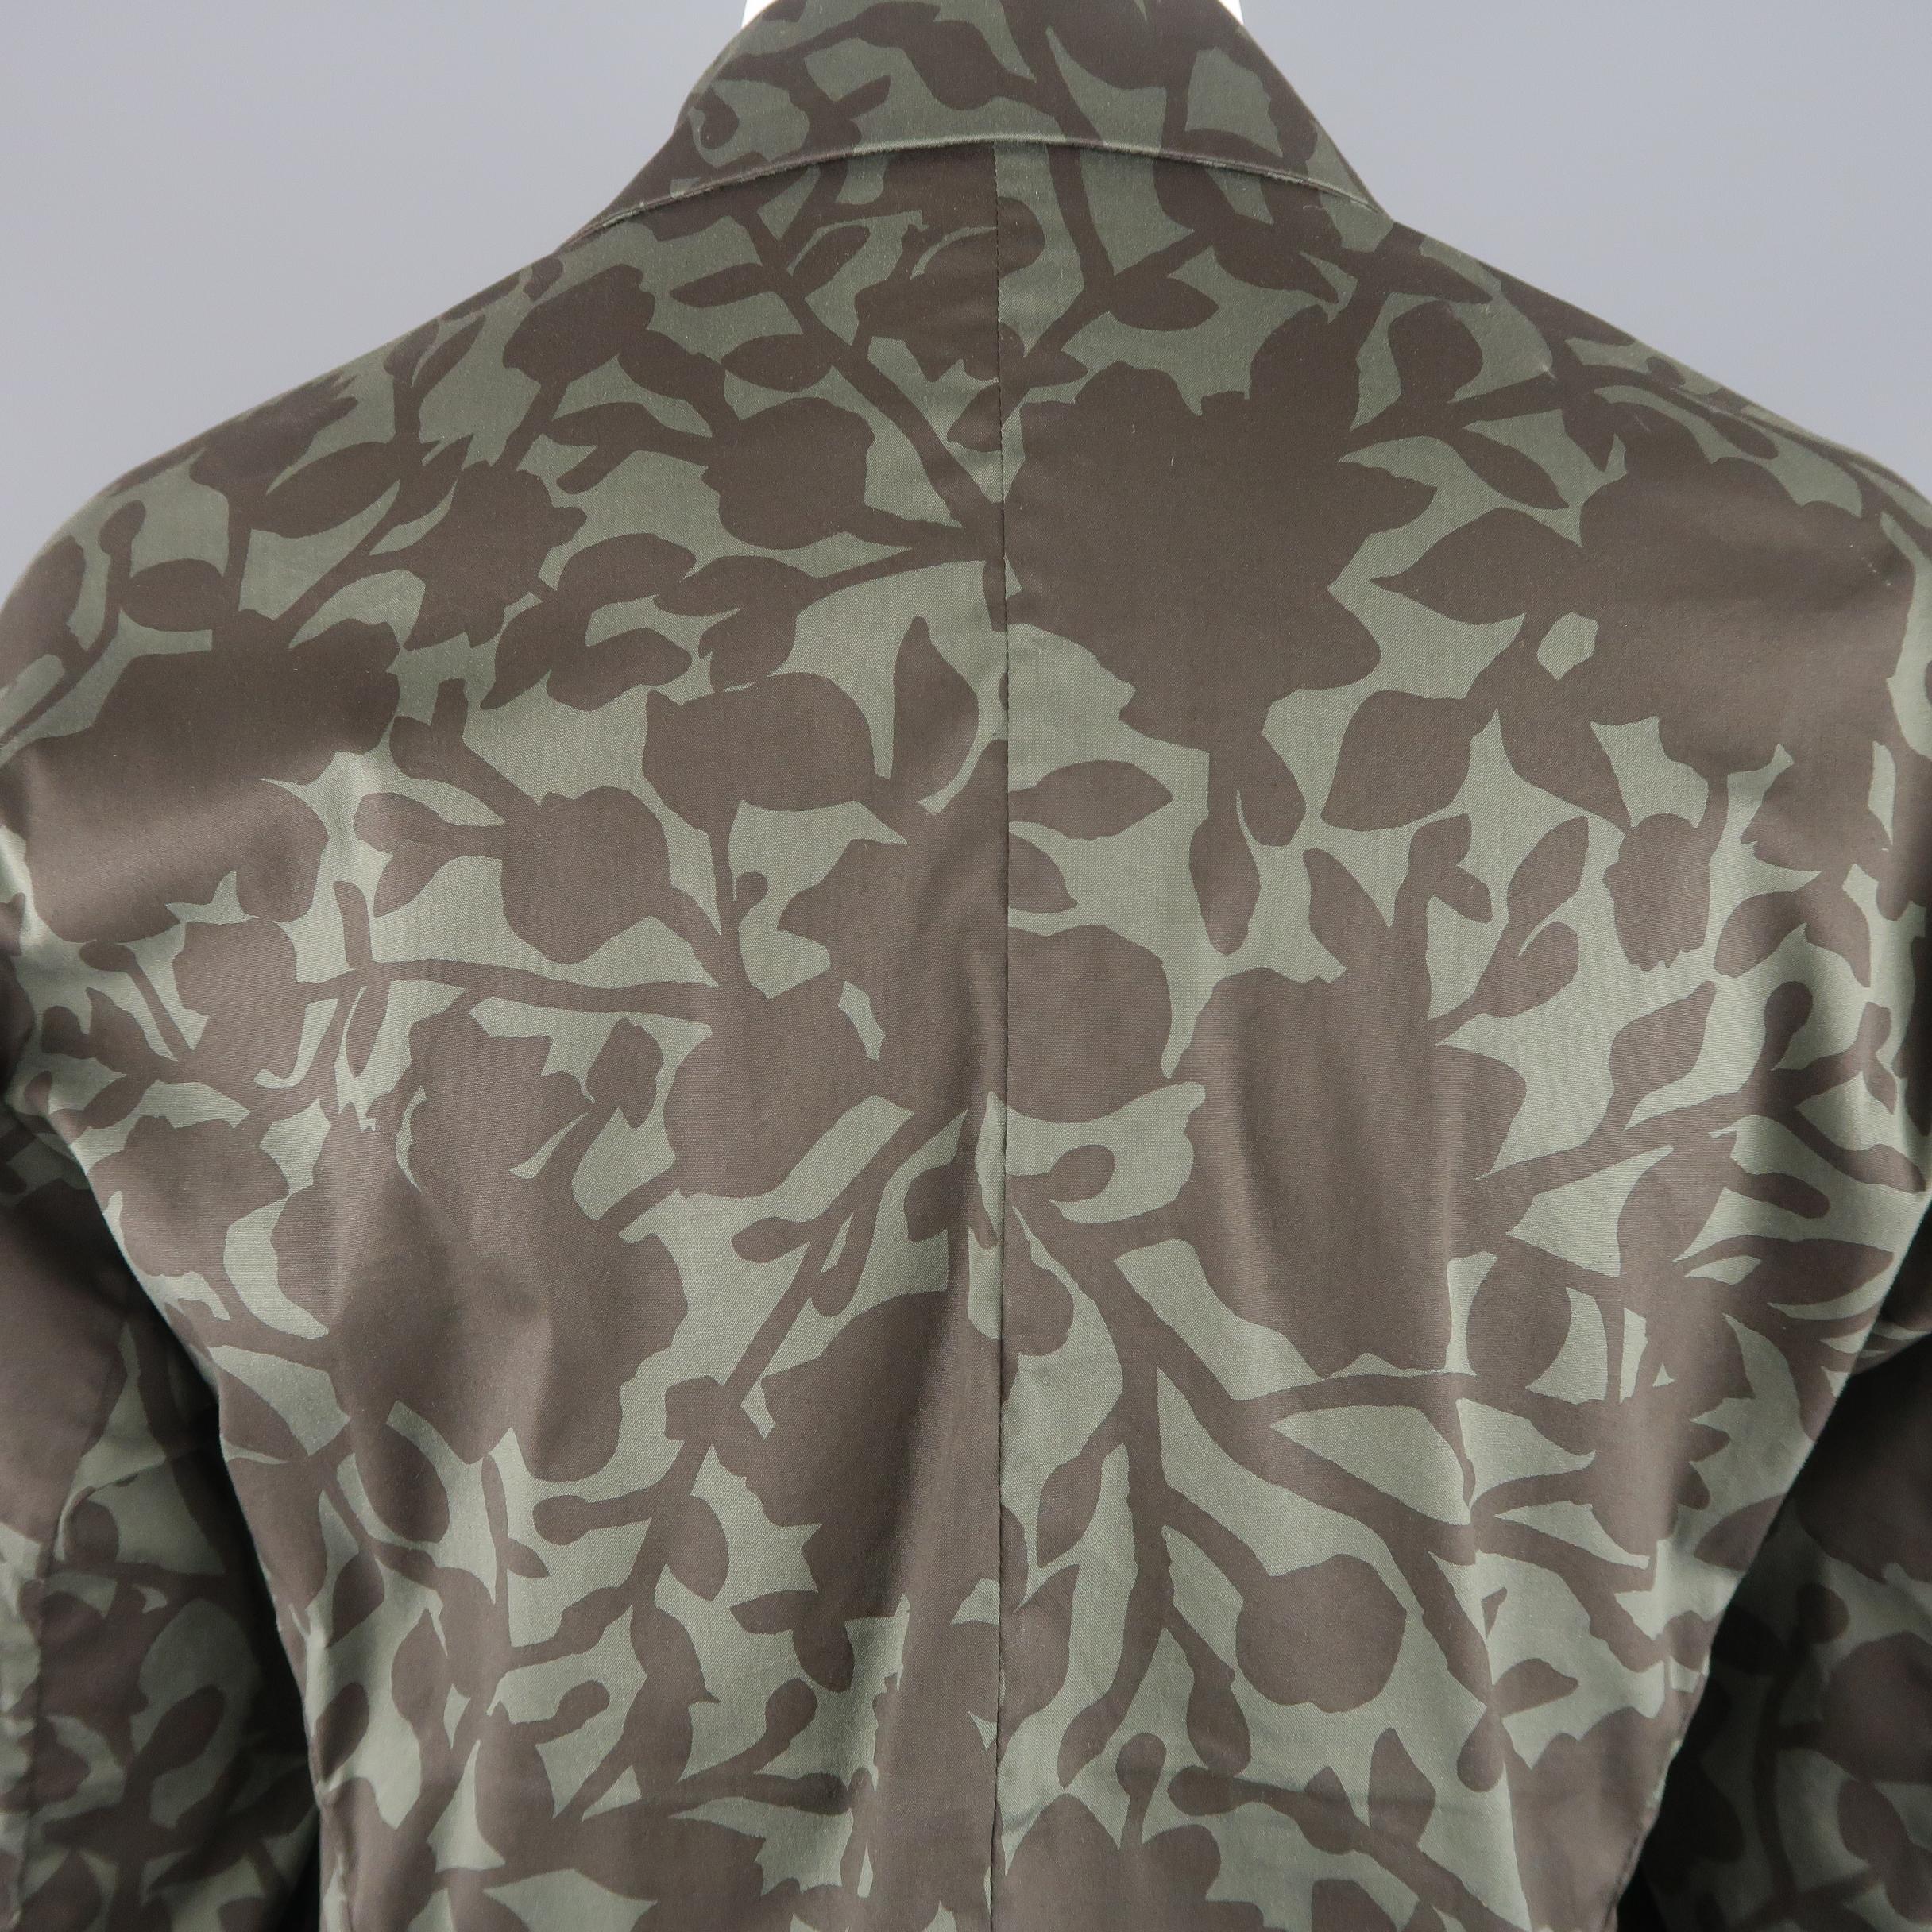 YVES SAINT LAURENT Size 6 Olive Green Floral Print Tied Blouse 2